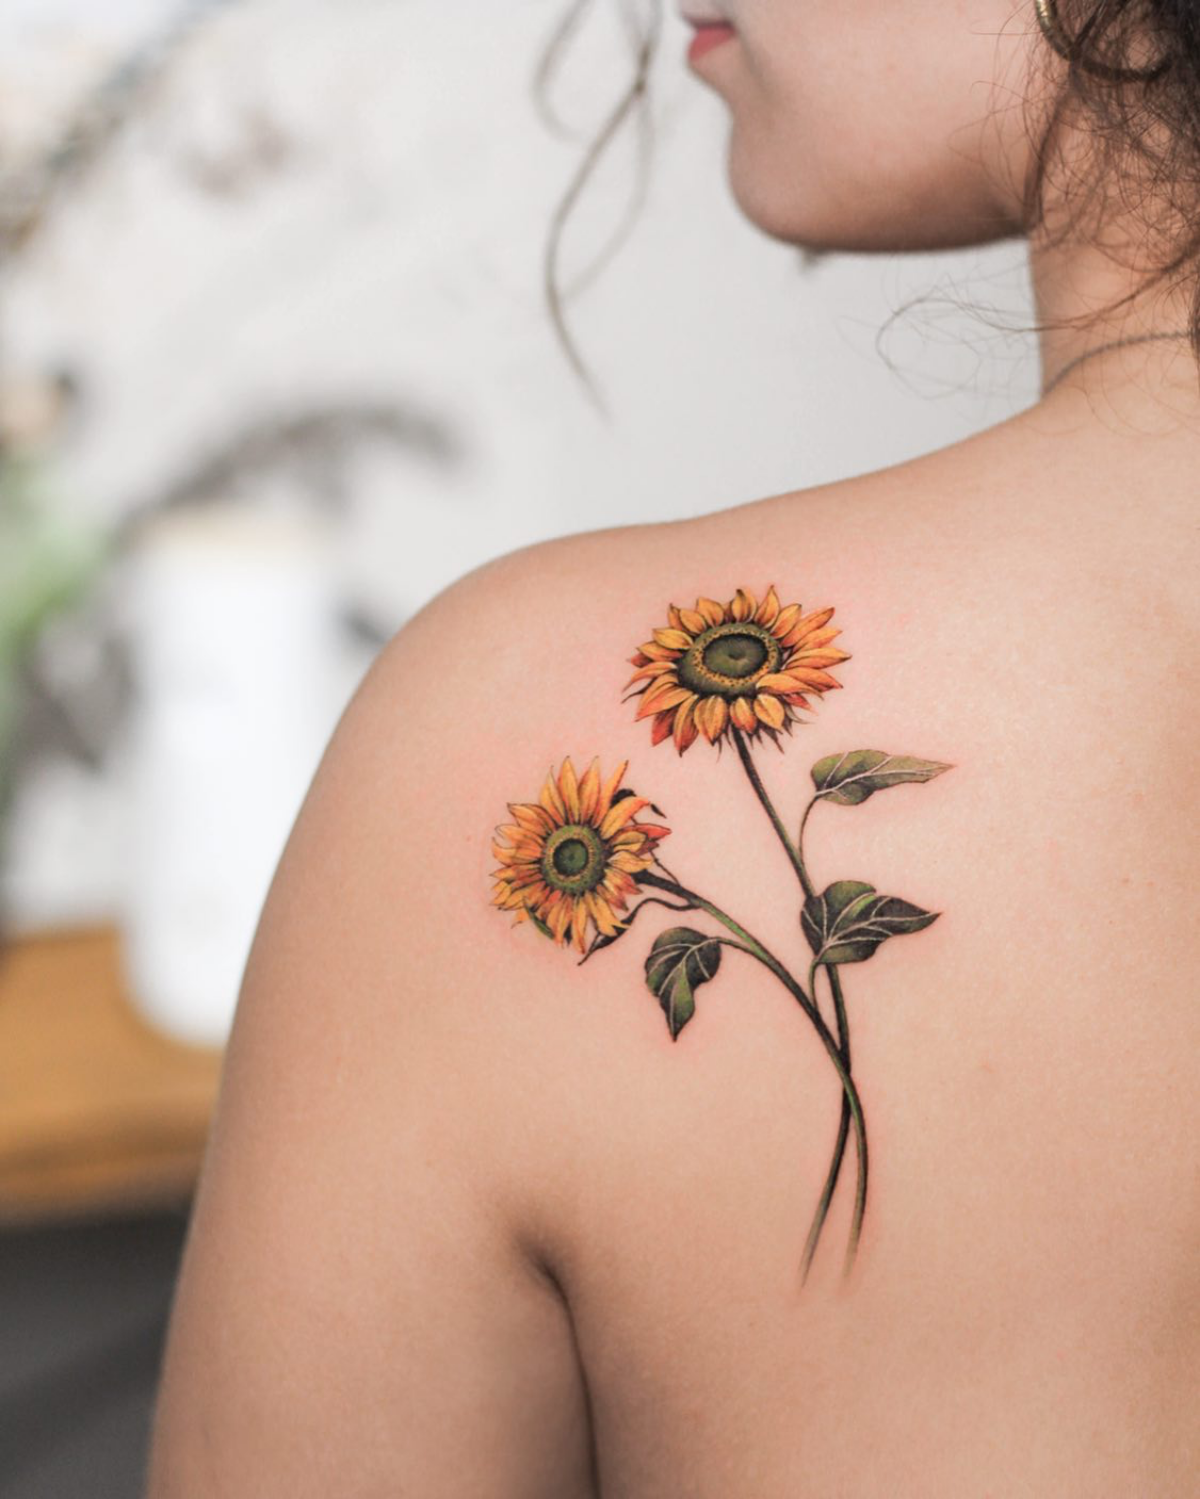 sunflower tattoo two sunflowers realistic and colorful